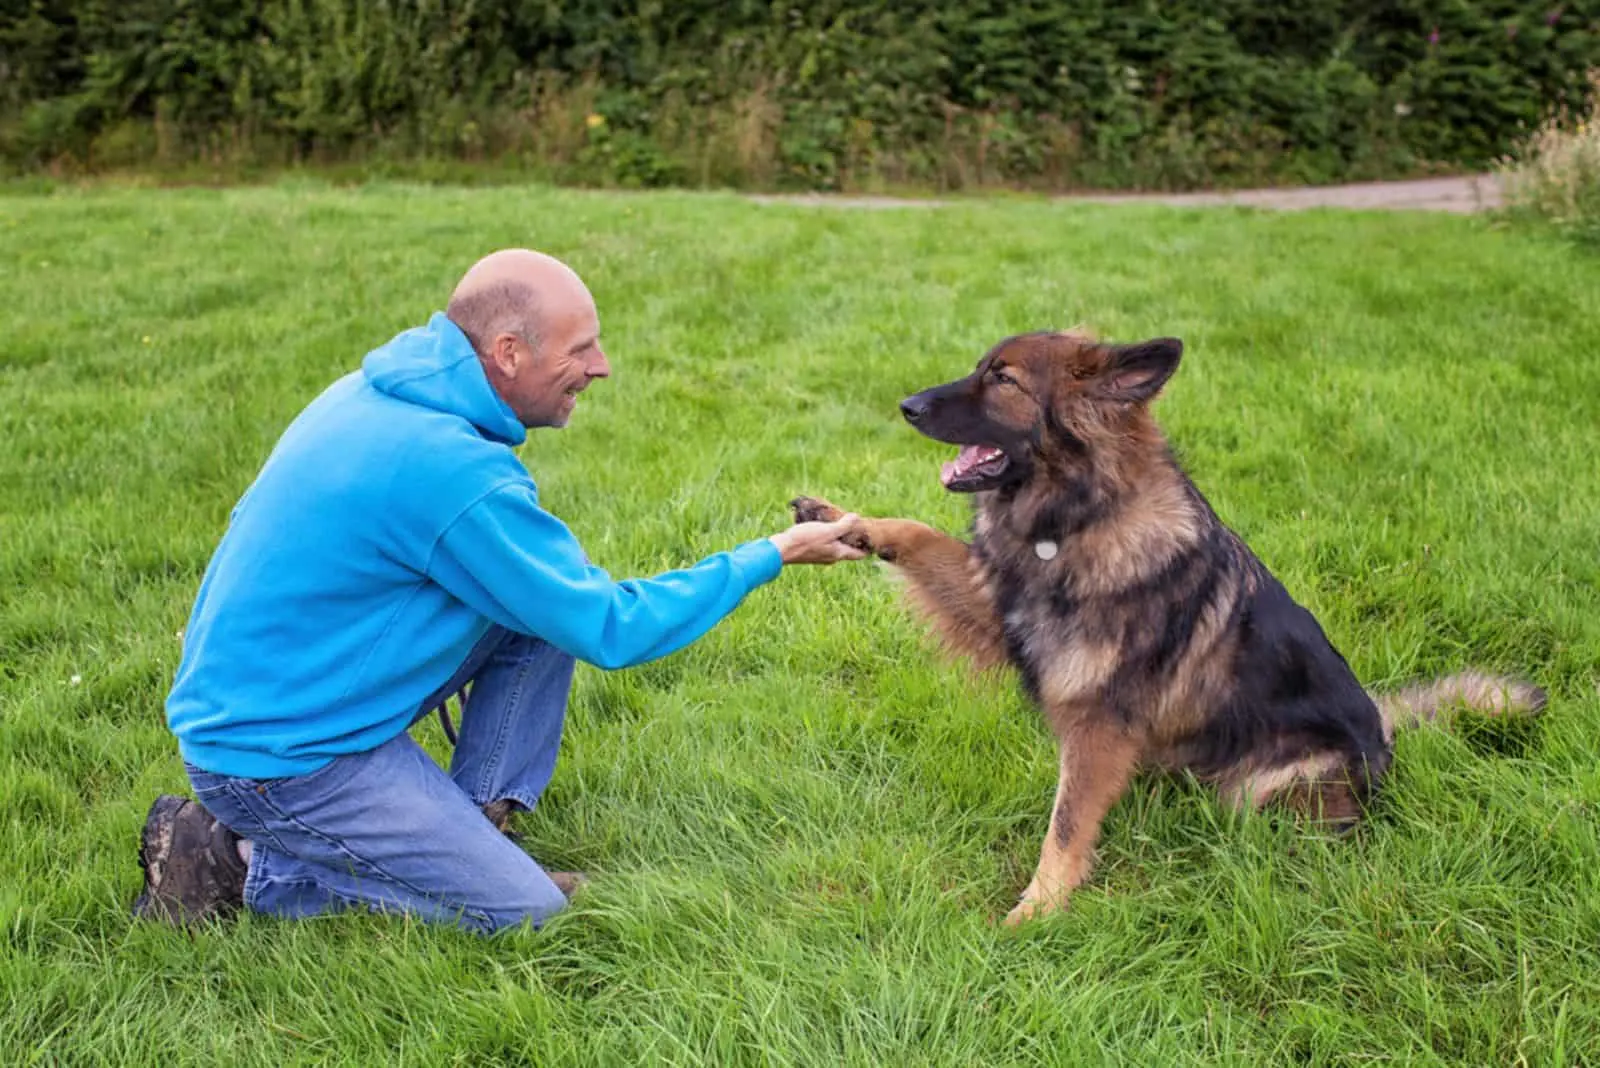 german shepherd dog shaking his owner's hand in the park